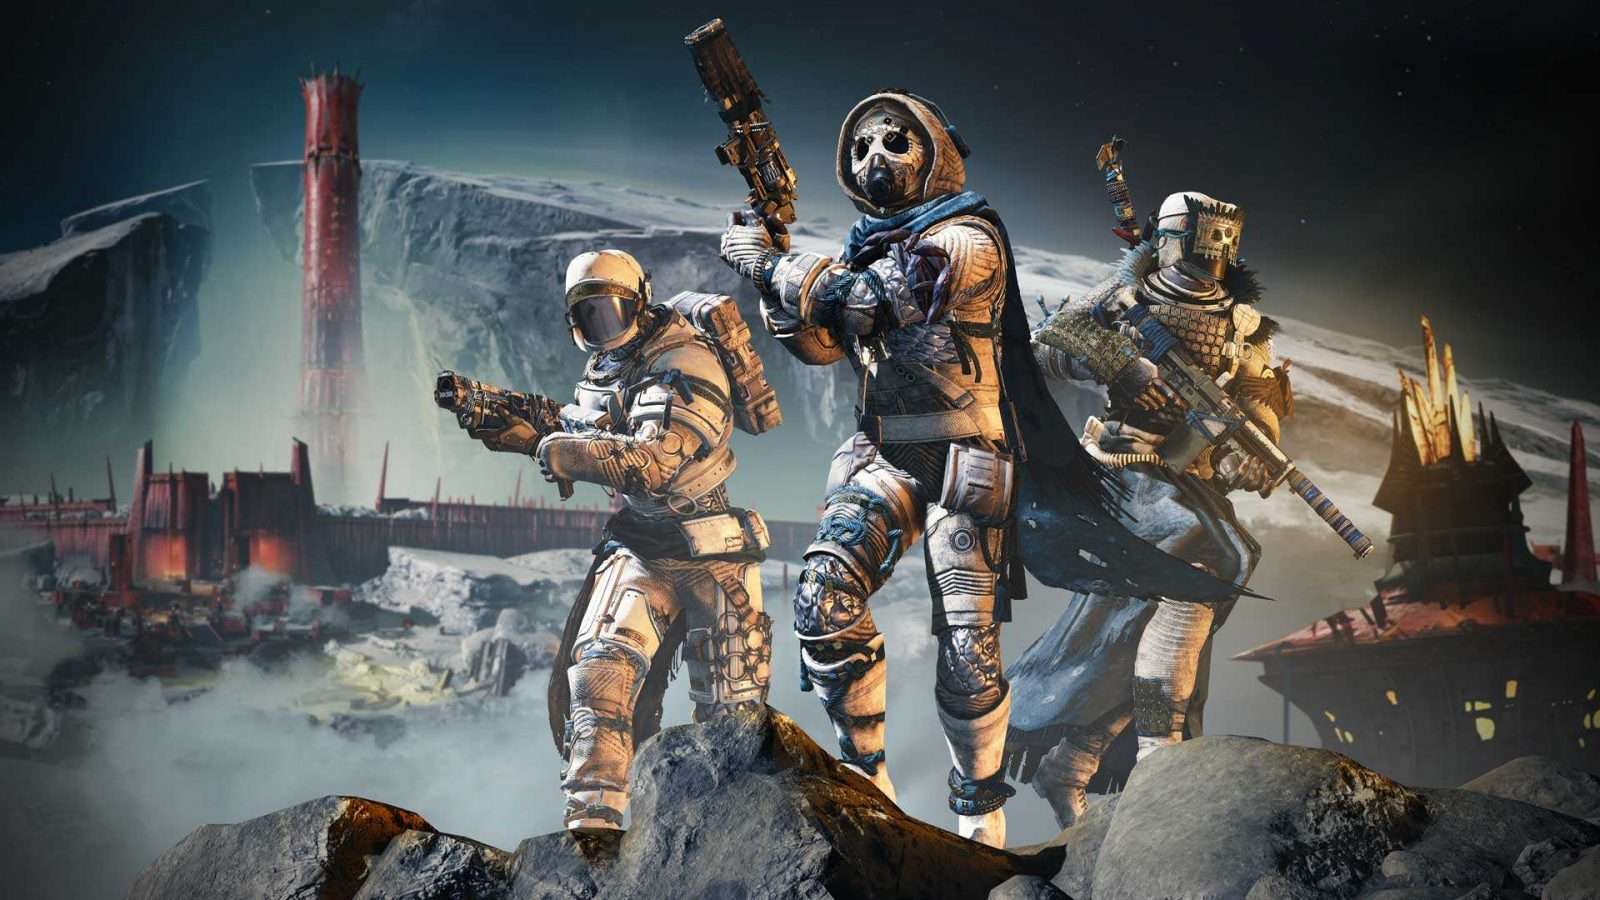 Destiny 2 Shadowkeep image showing Guardians on the moon